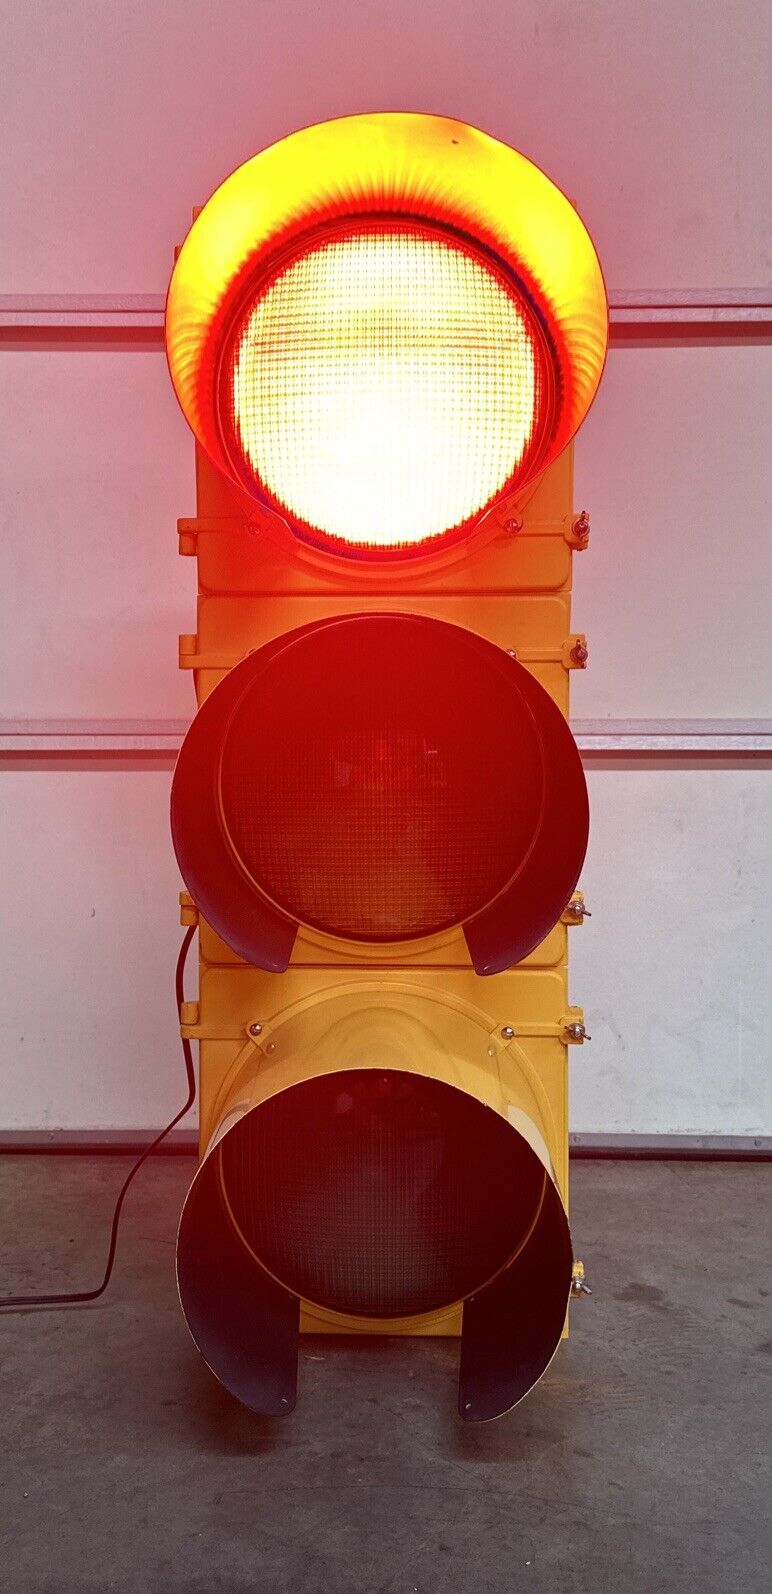 McCain Traffic Light Aluminum With Sequencer